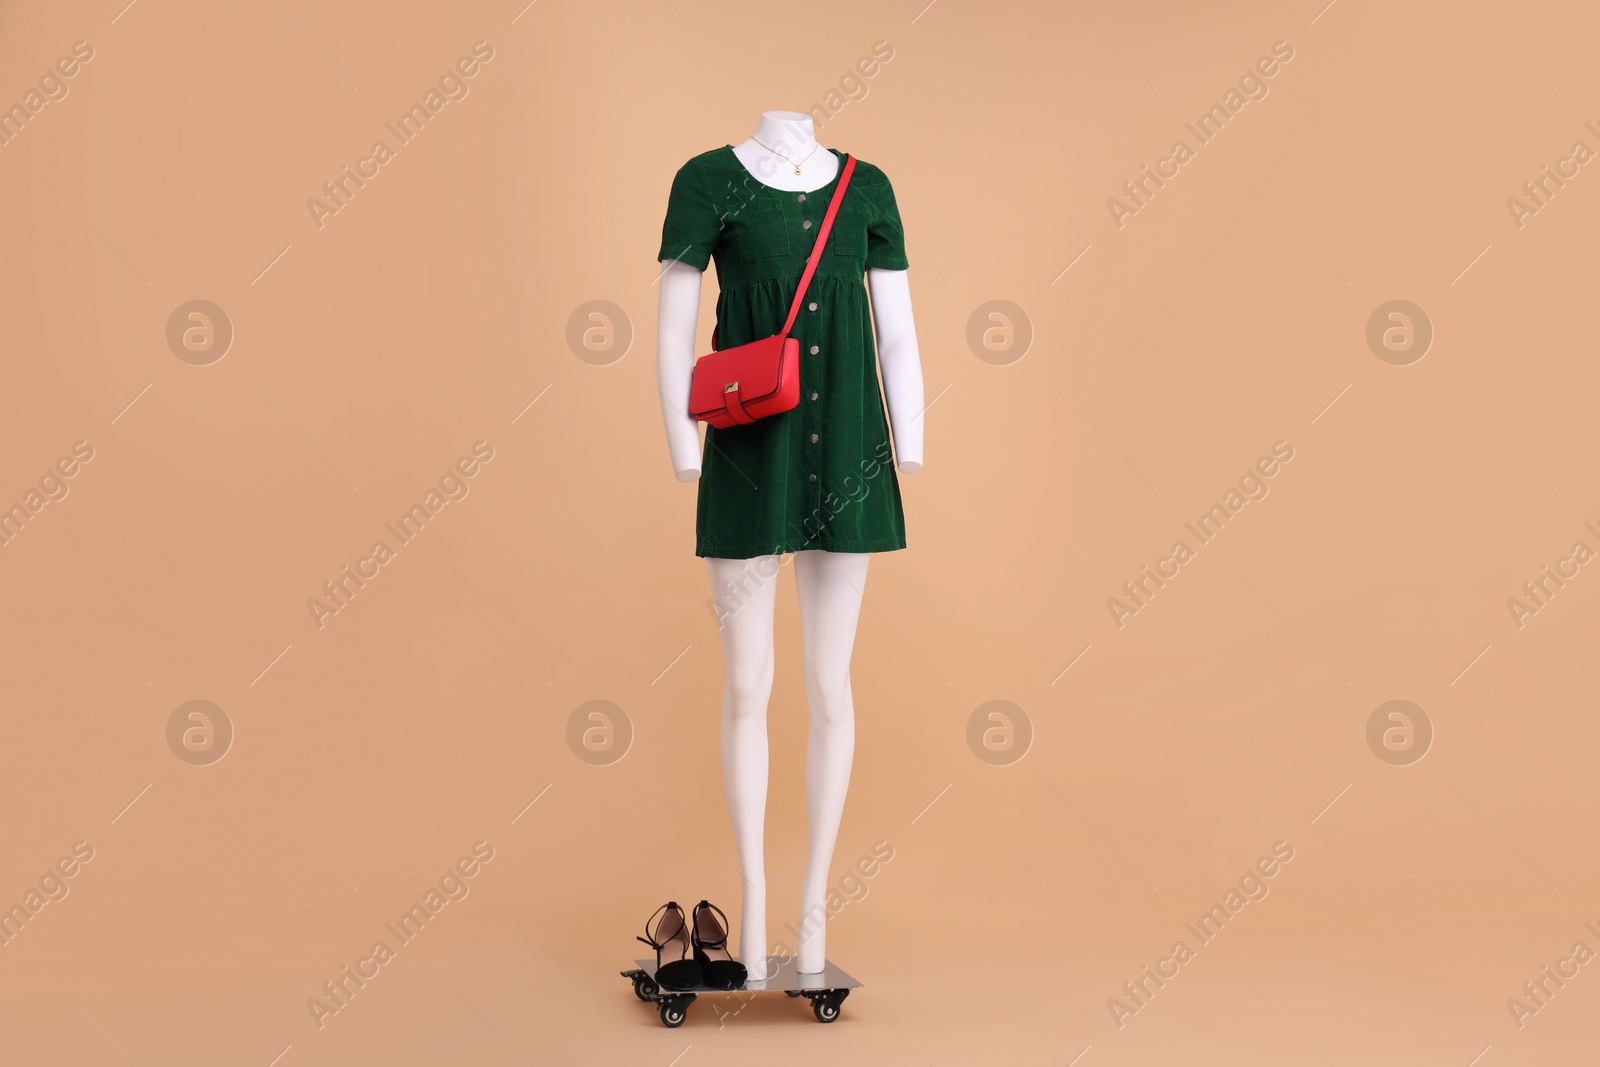 Photo of Female mannequin with accessories and shoes dressed in dark green dress on beige background. Stylish outfit